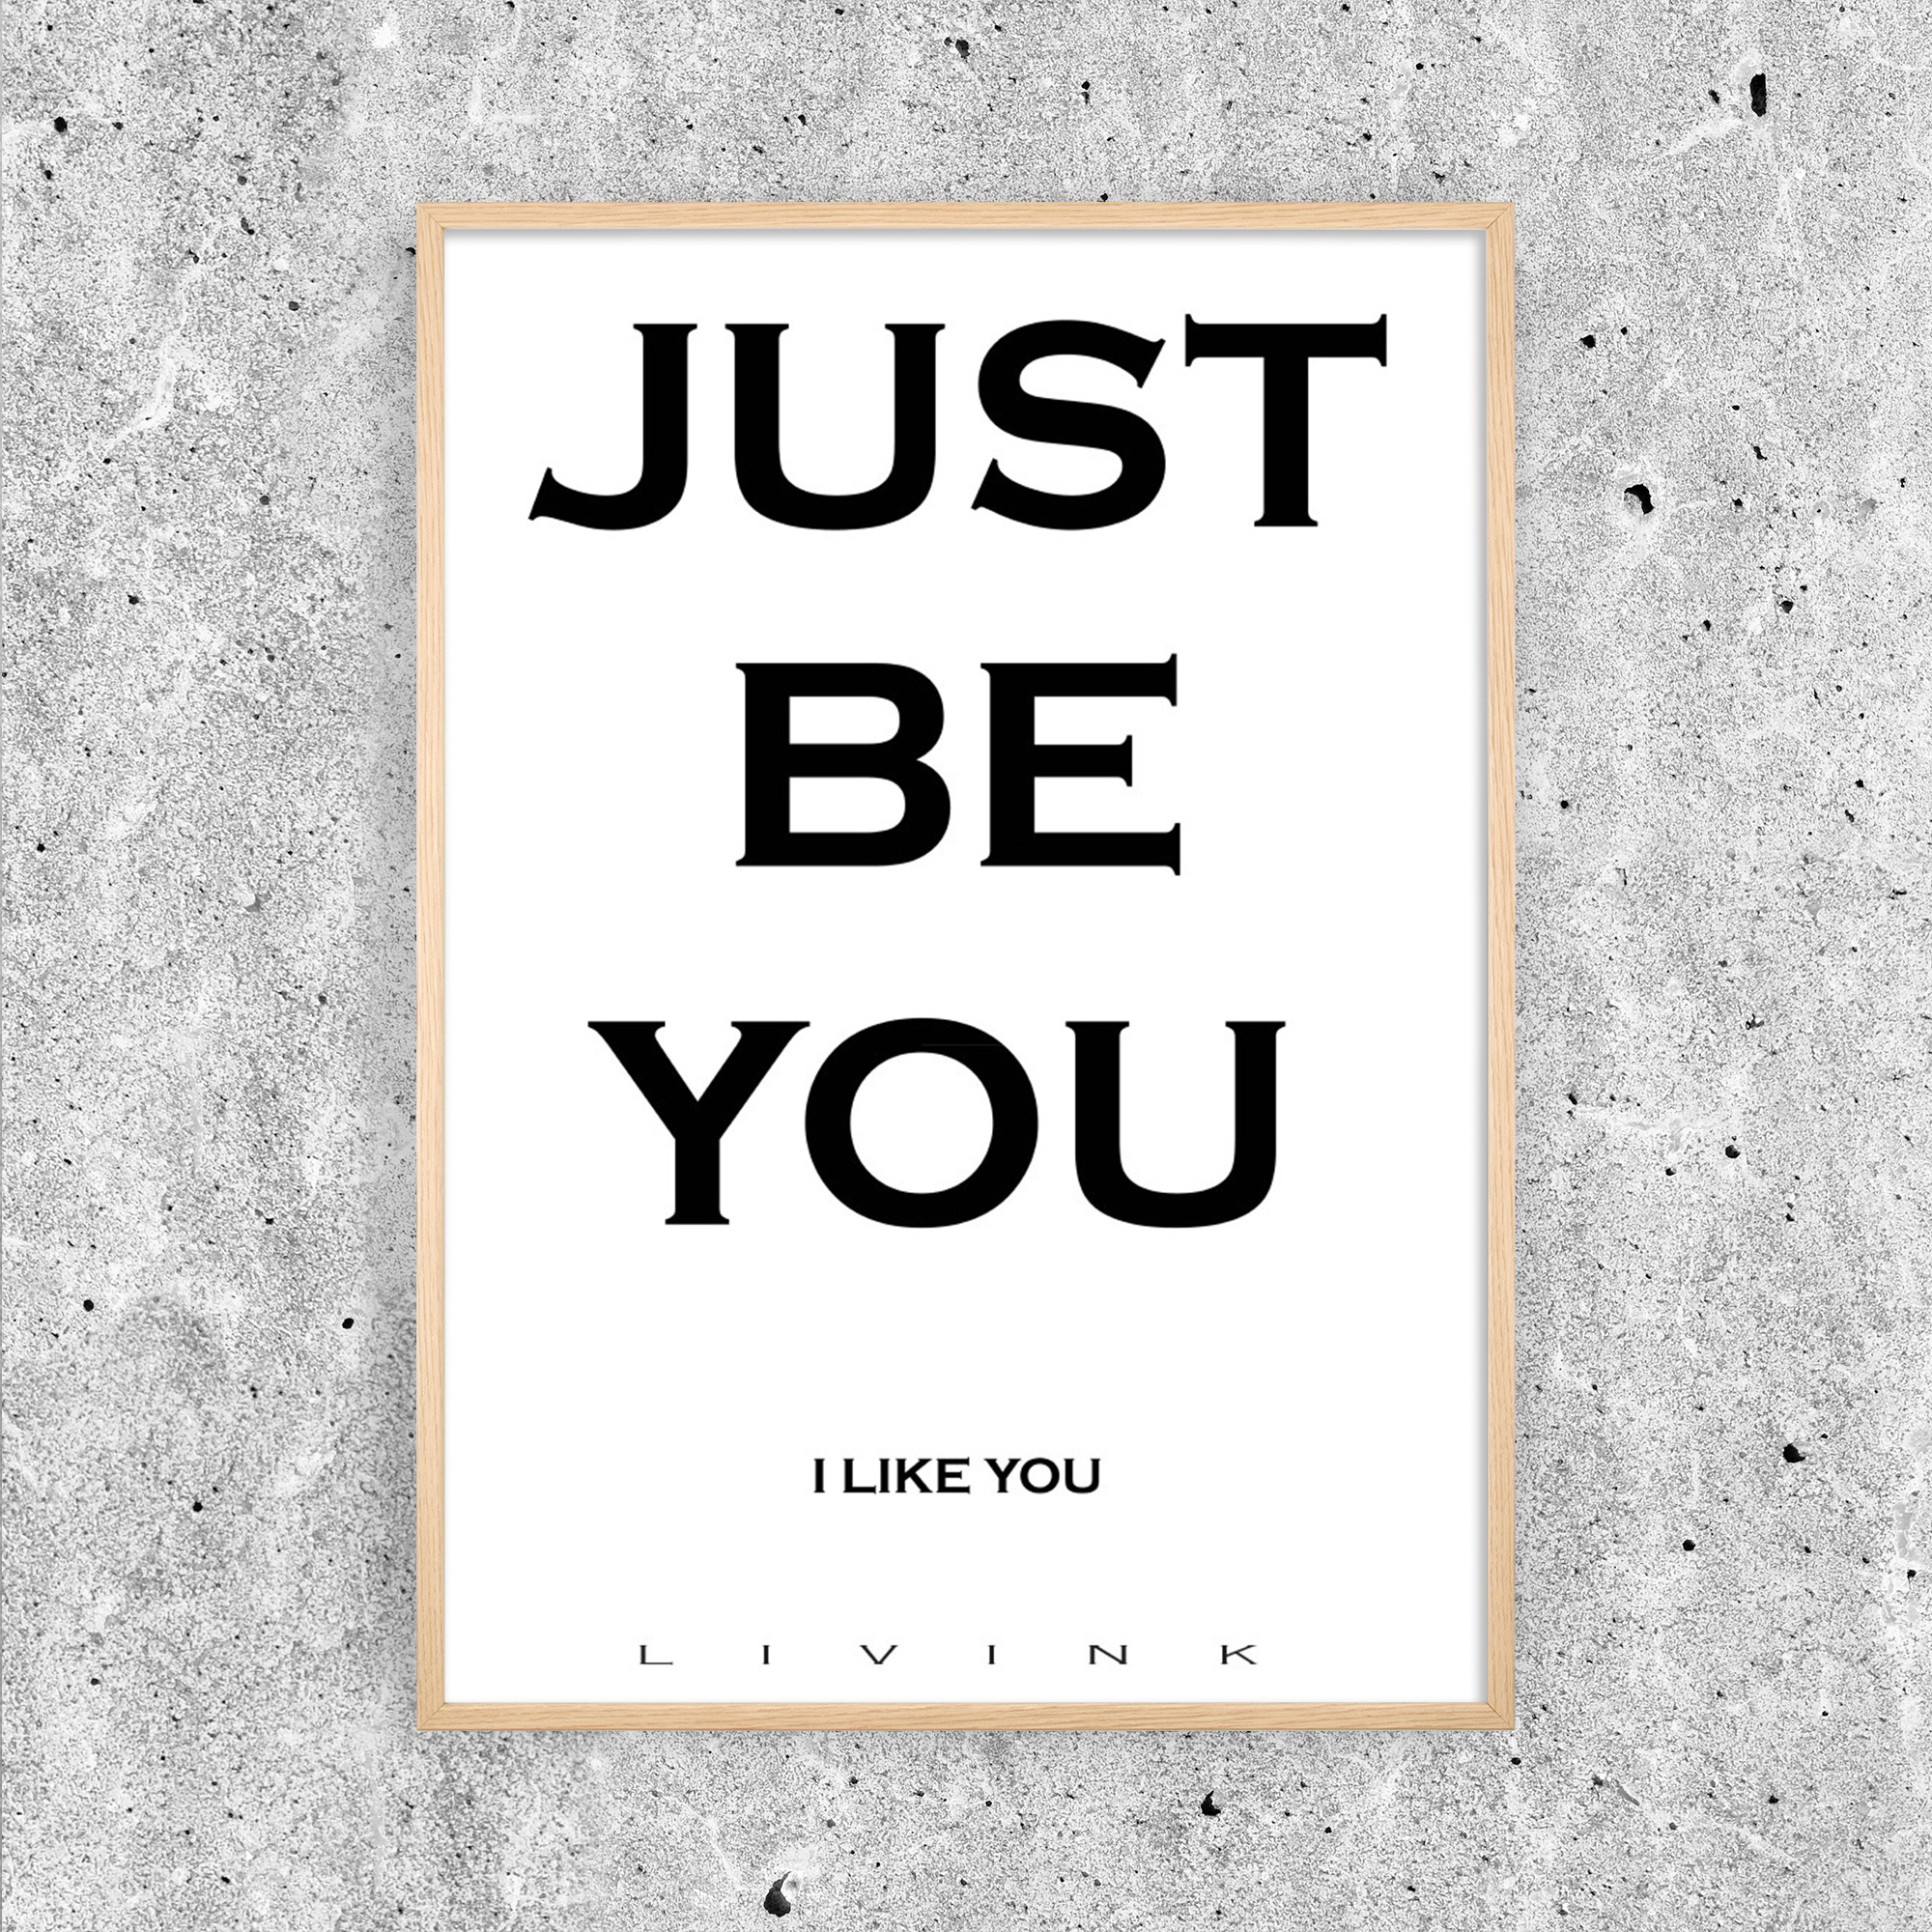 JUST BE YOU